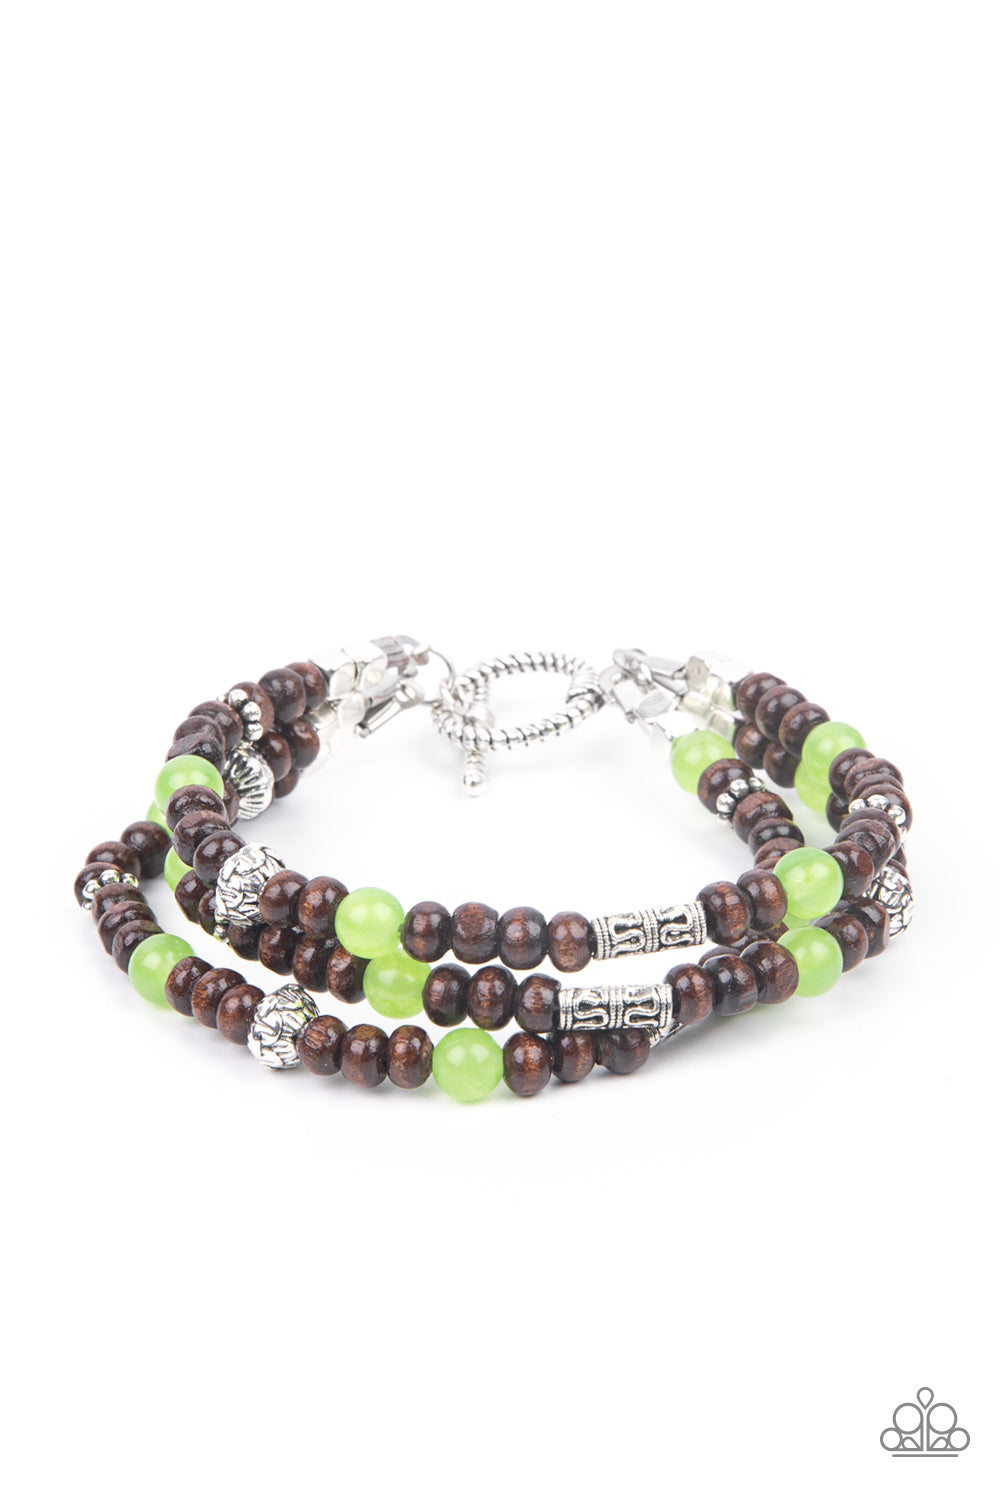 Paparazzi Woodsy Walkabout - Green Bracelet - A Finishing Touch Jewelry